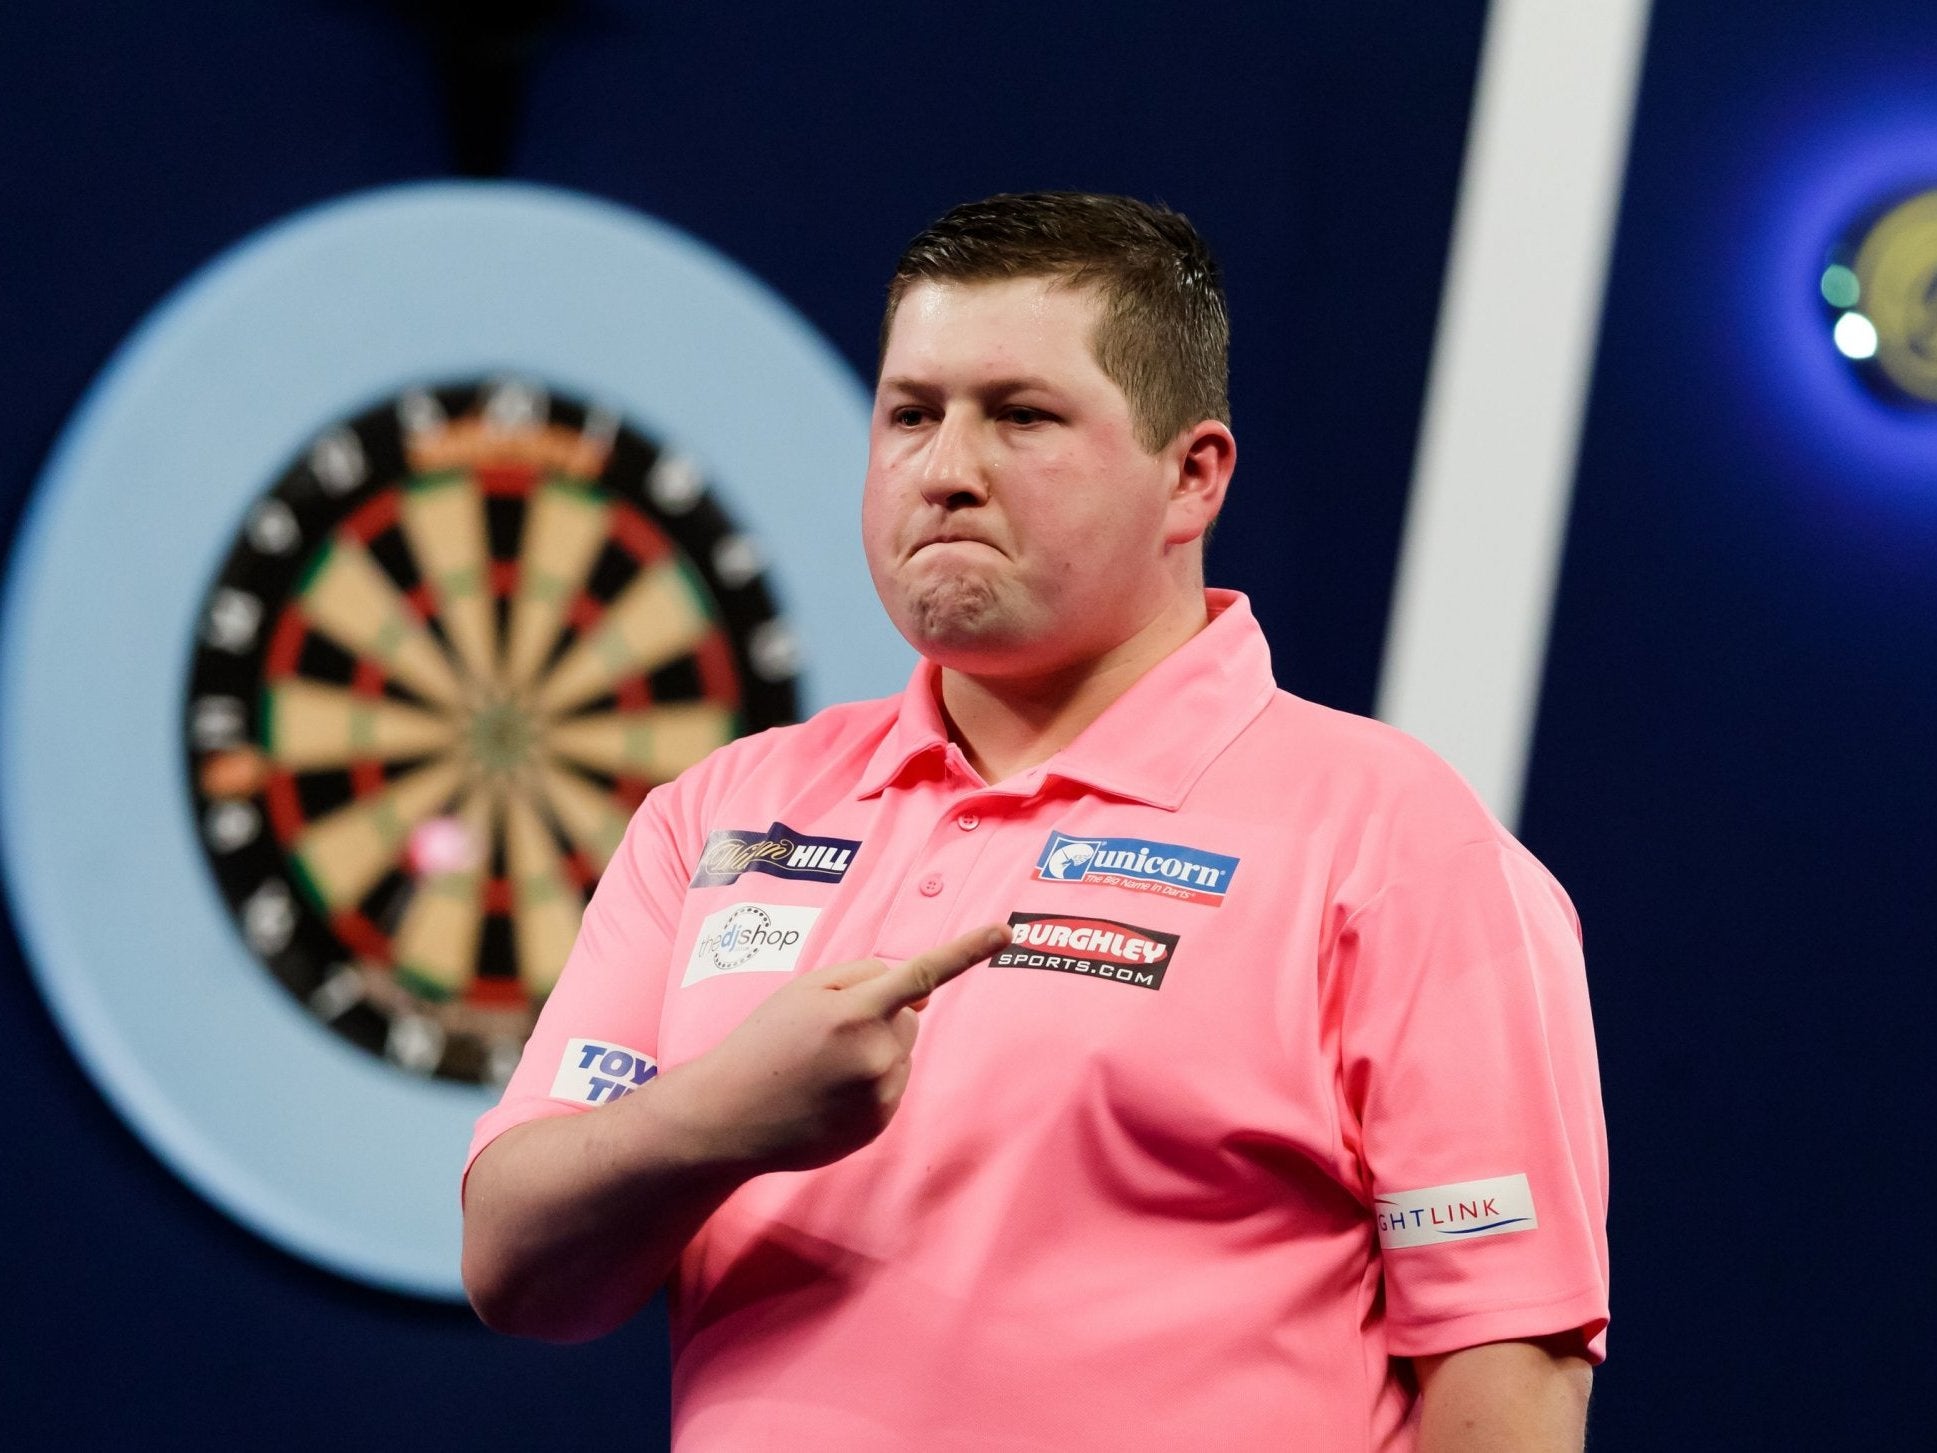 Keegan Brown had been on top early in the match